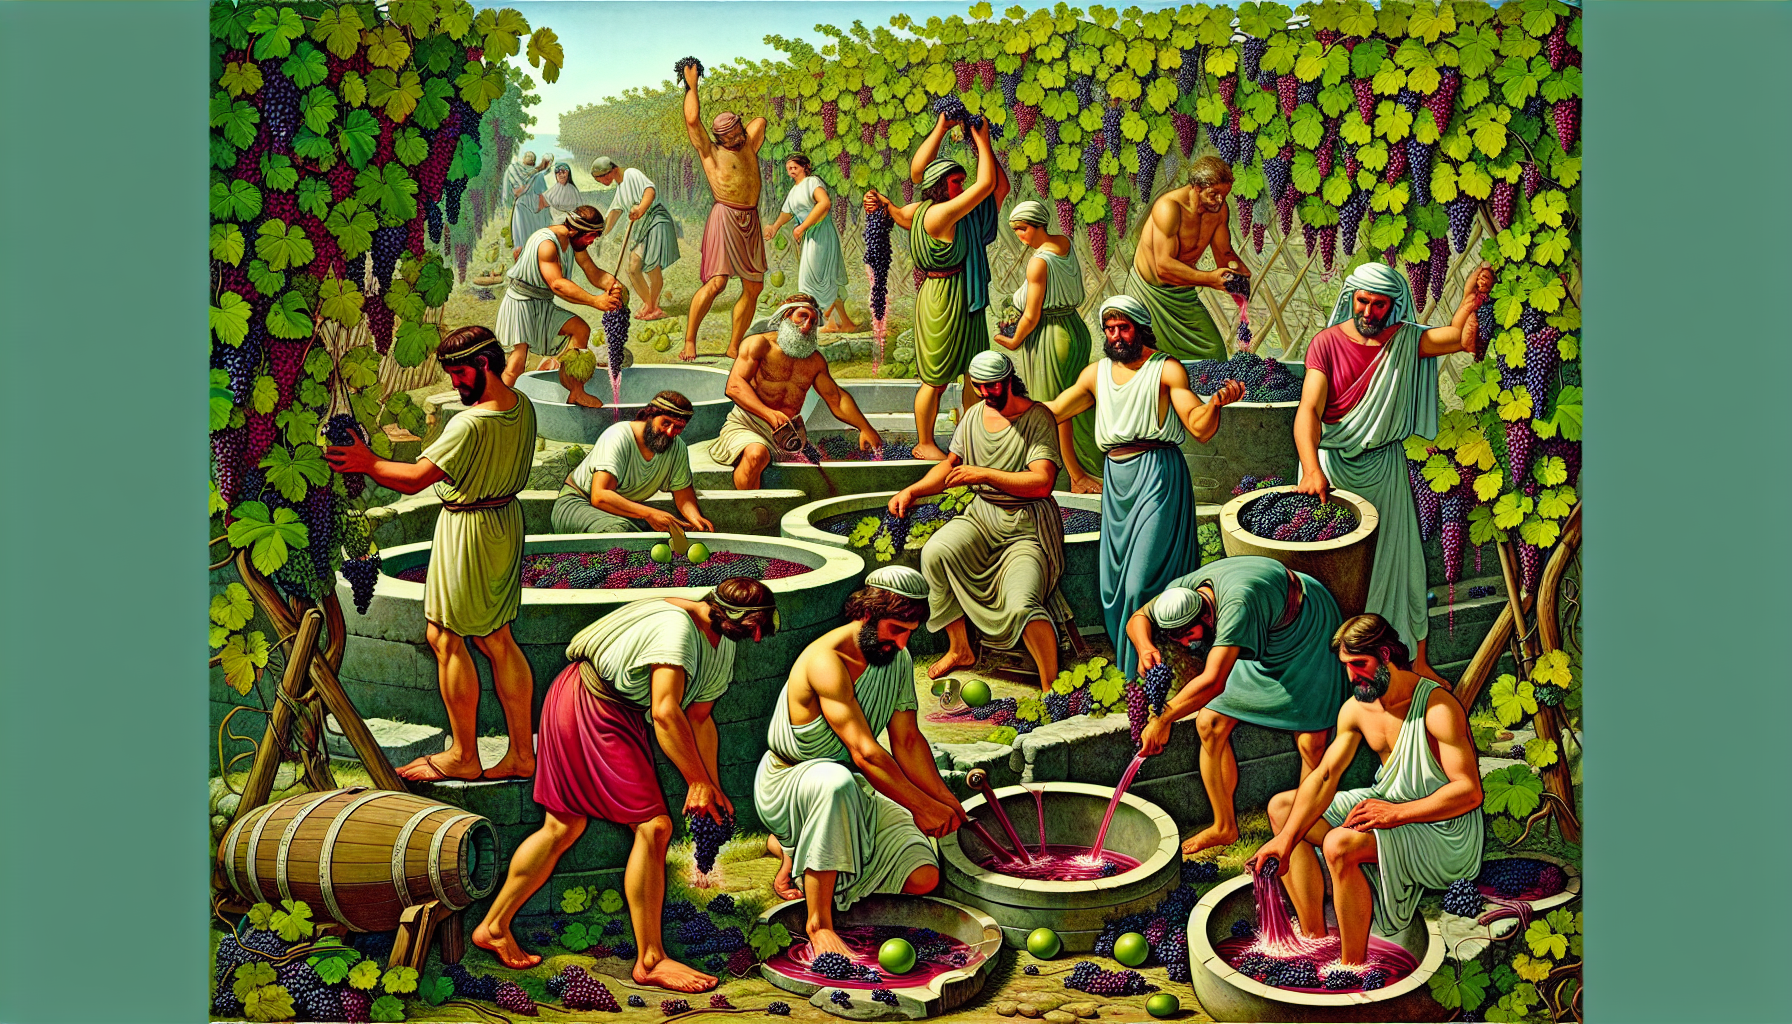 Illustration of ancient civilizations harvesting grapes and making wine